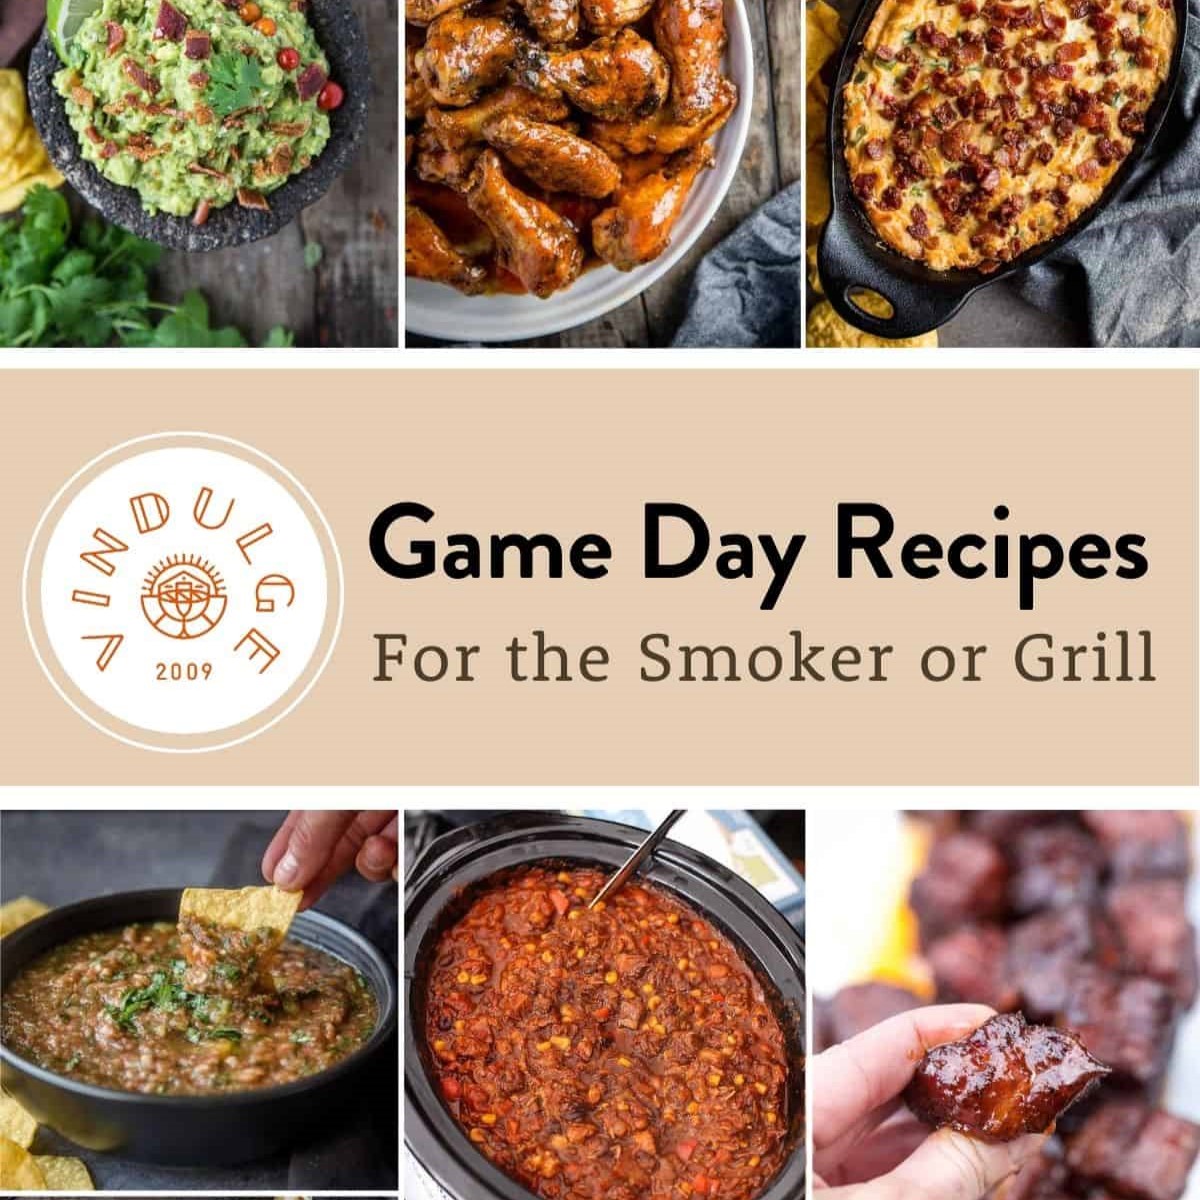 Game Day Food Ideas, Snacks for Game Day